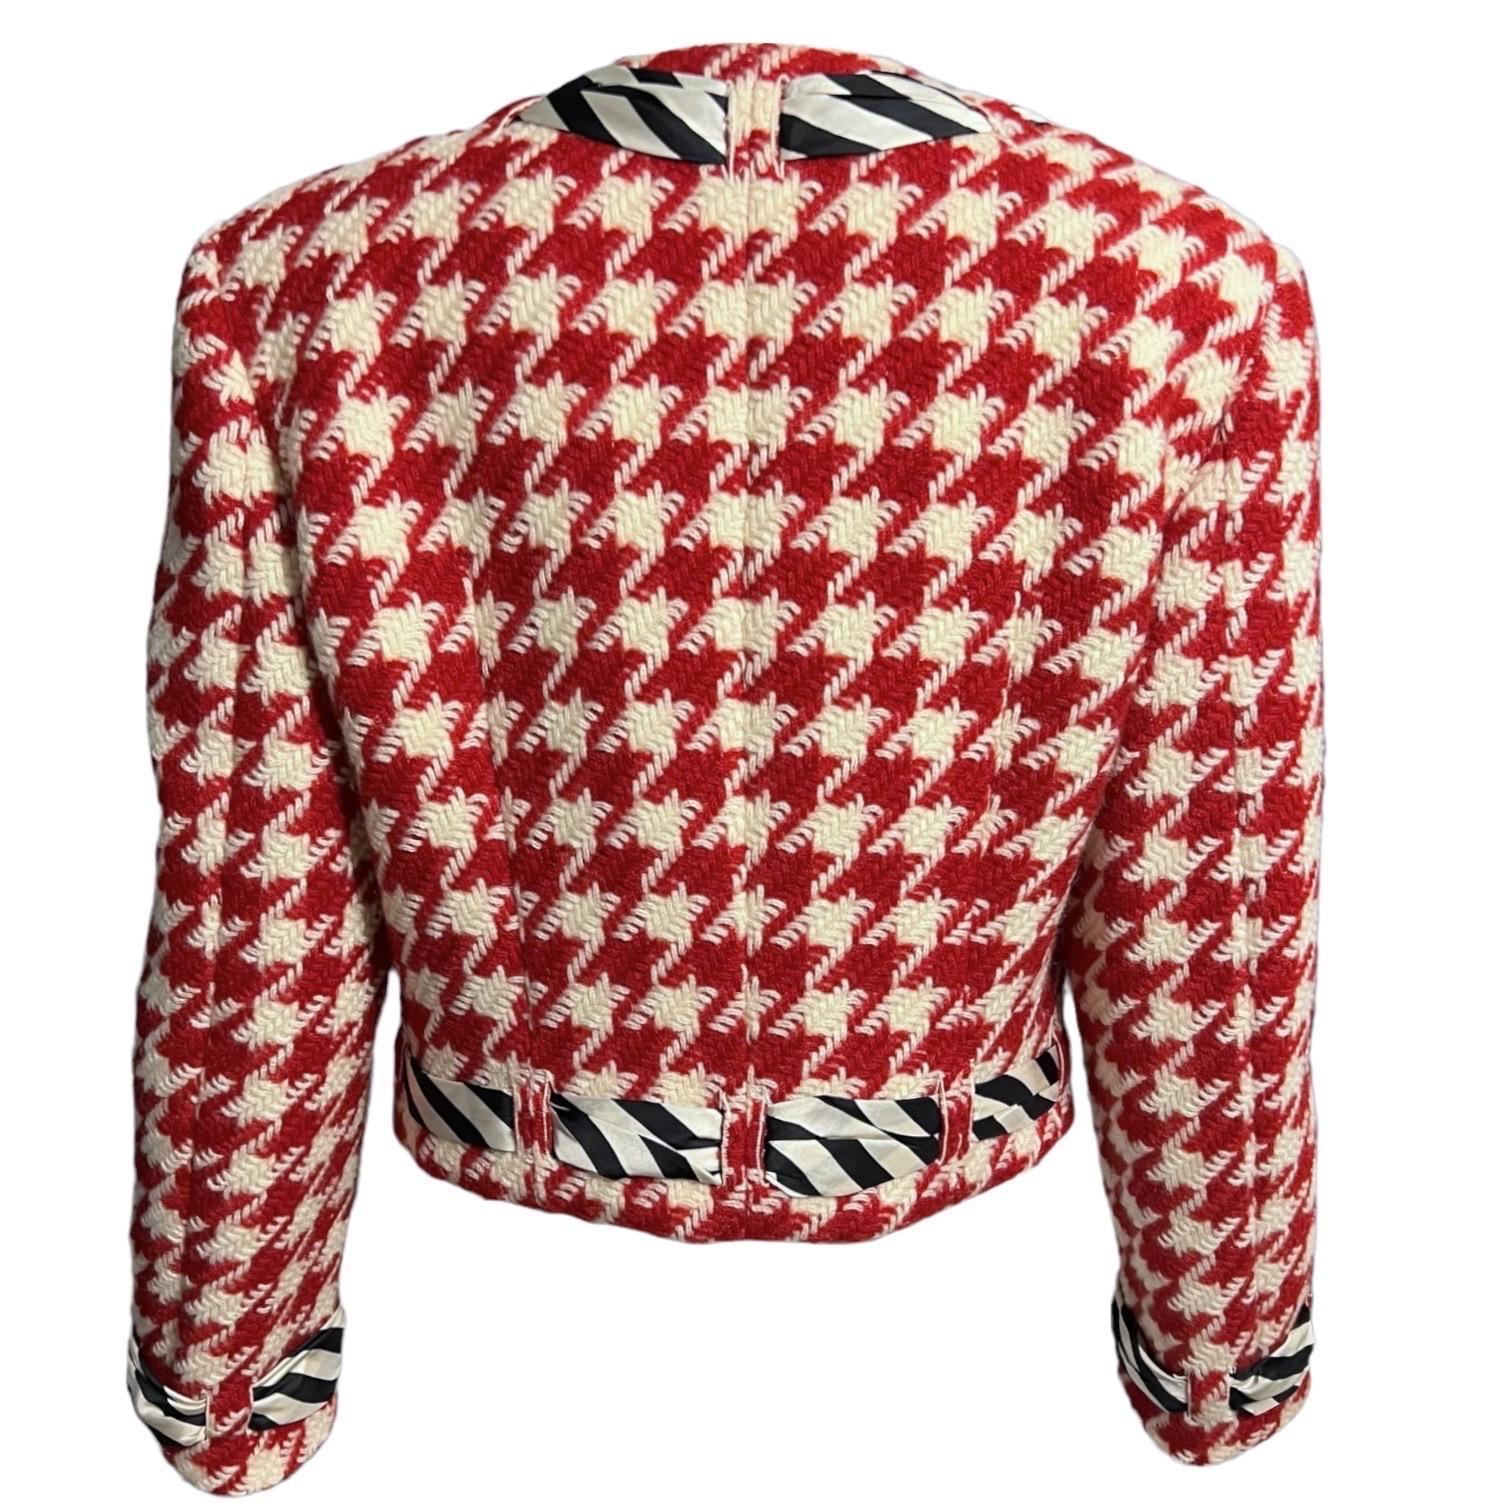 Moschino Cheap and Chic Vintage Houndstooth Jacket as seen on Princess Diana 1